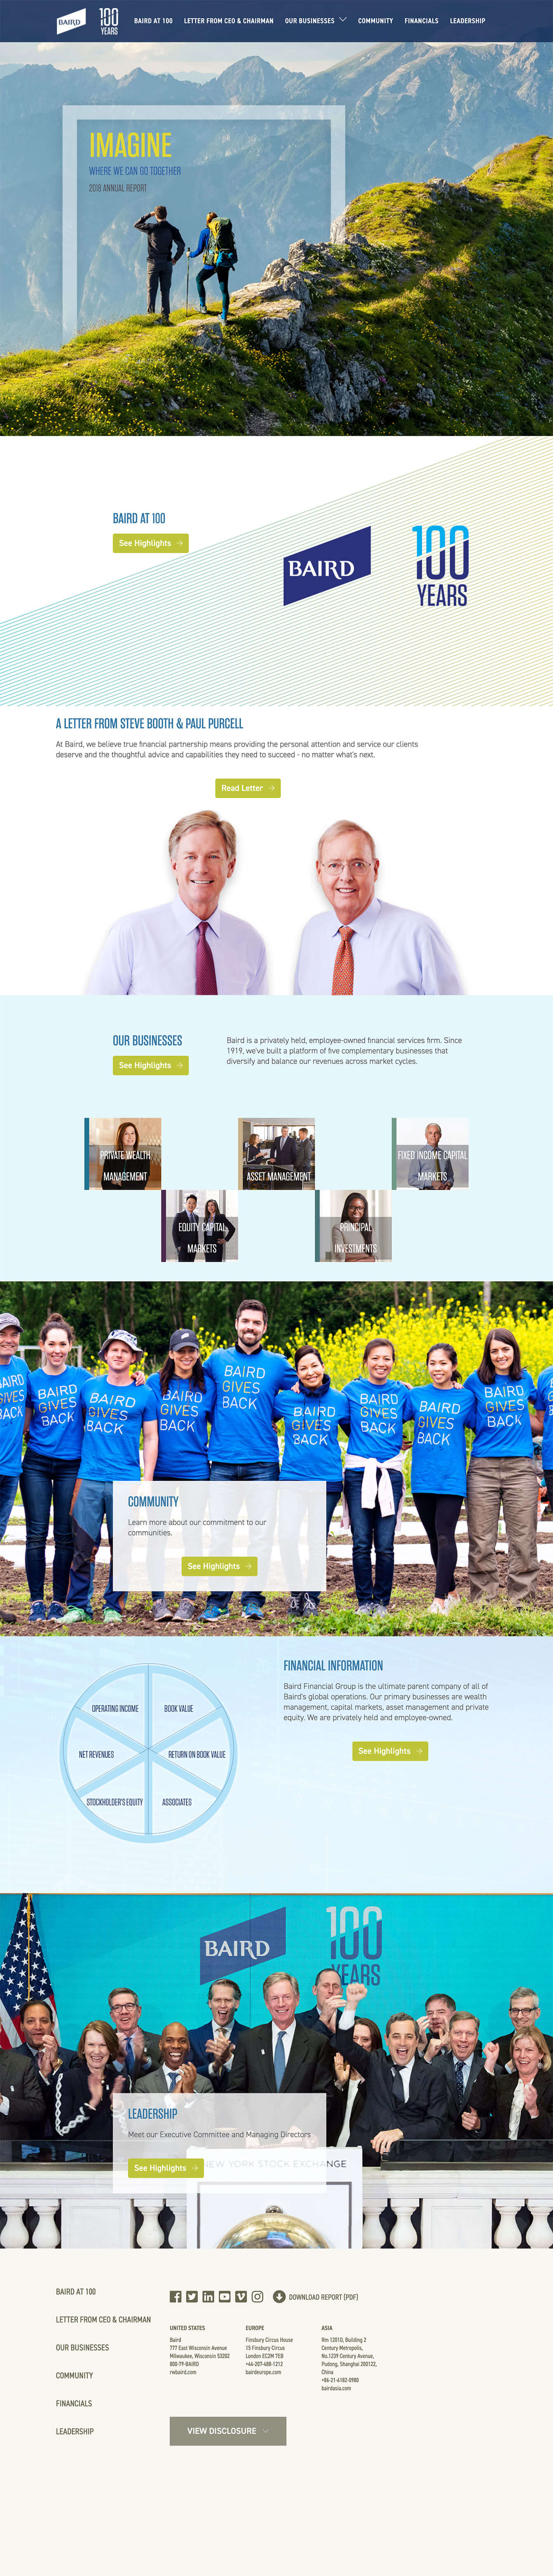 Baird 2018 Annual Report Landing Page